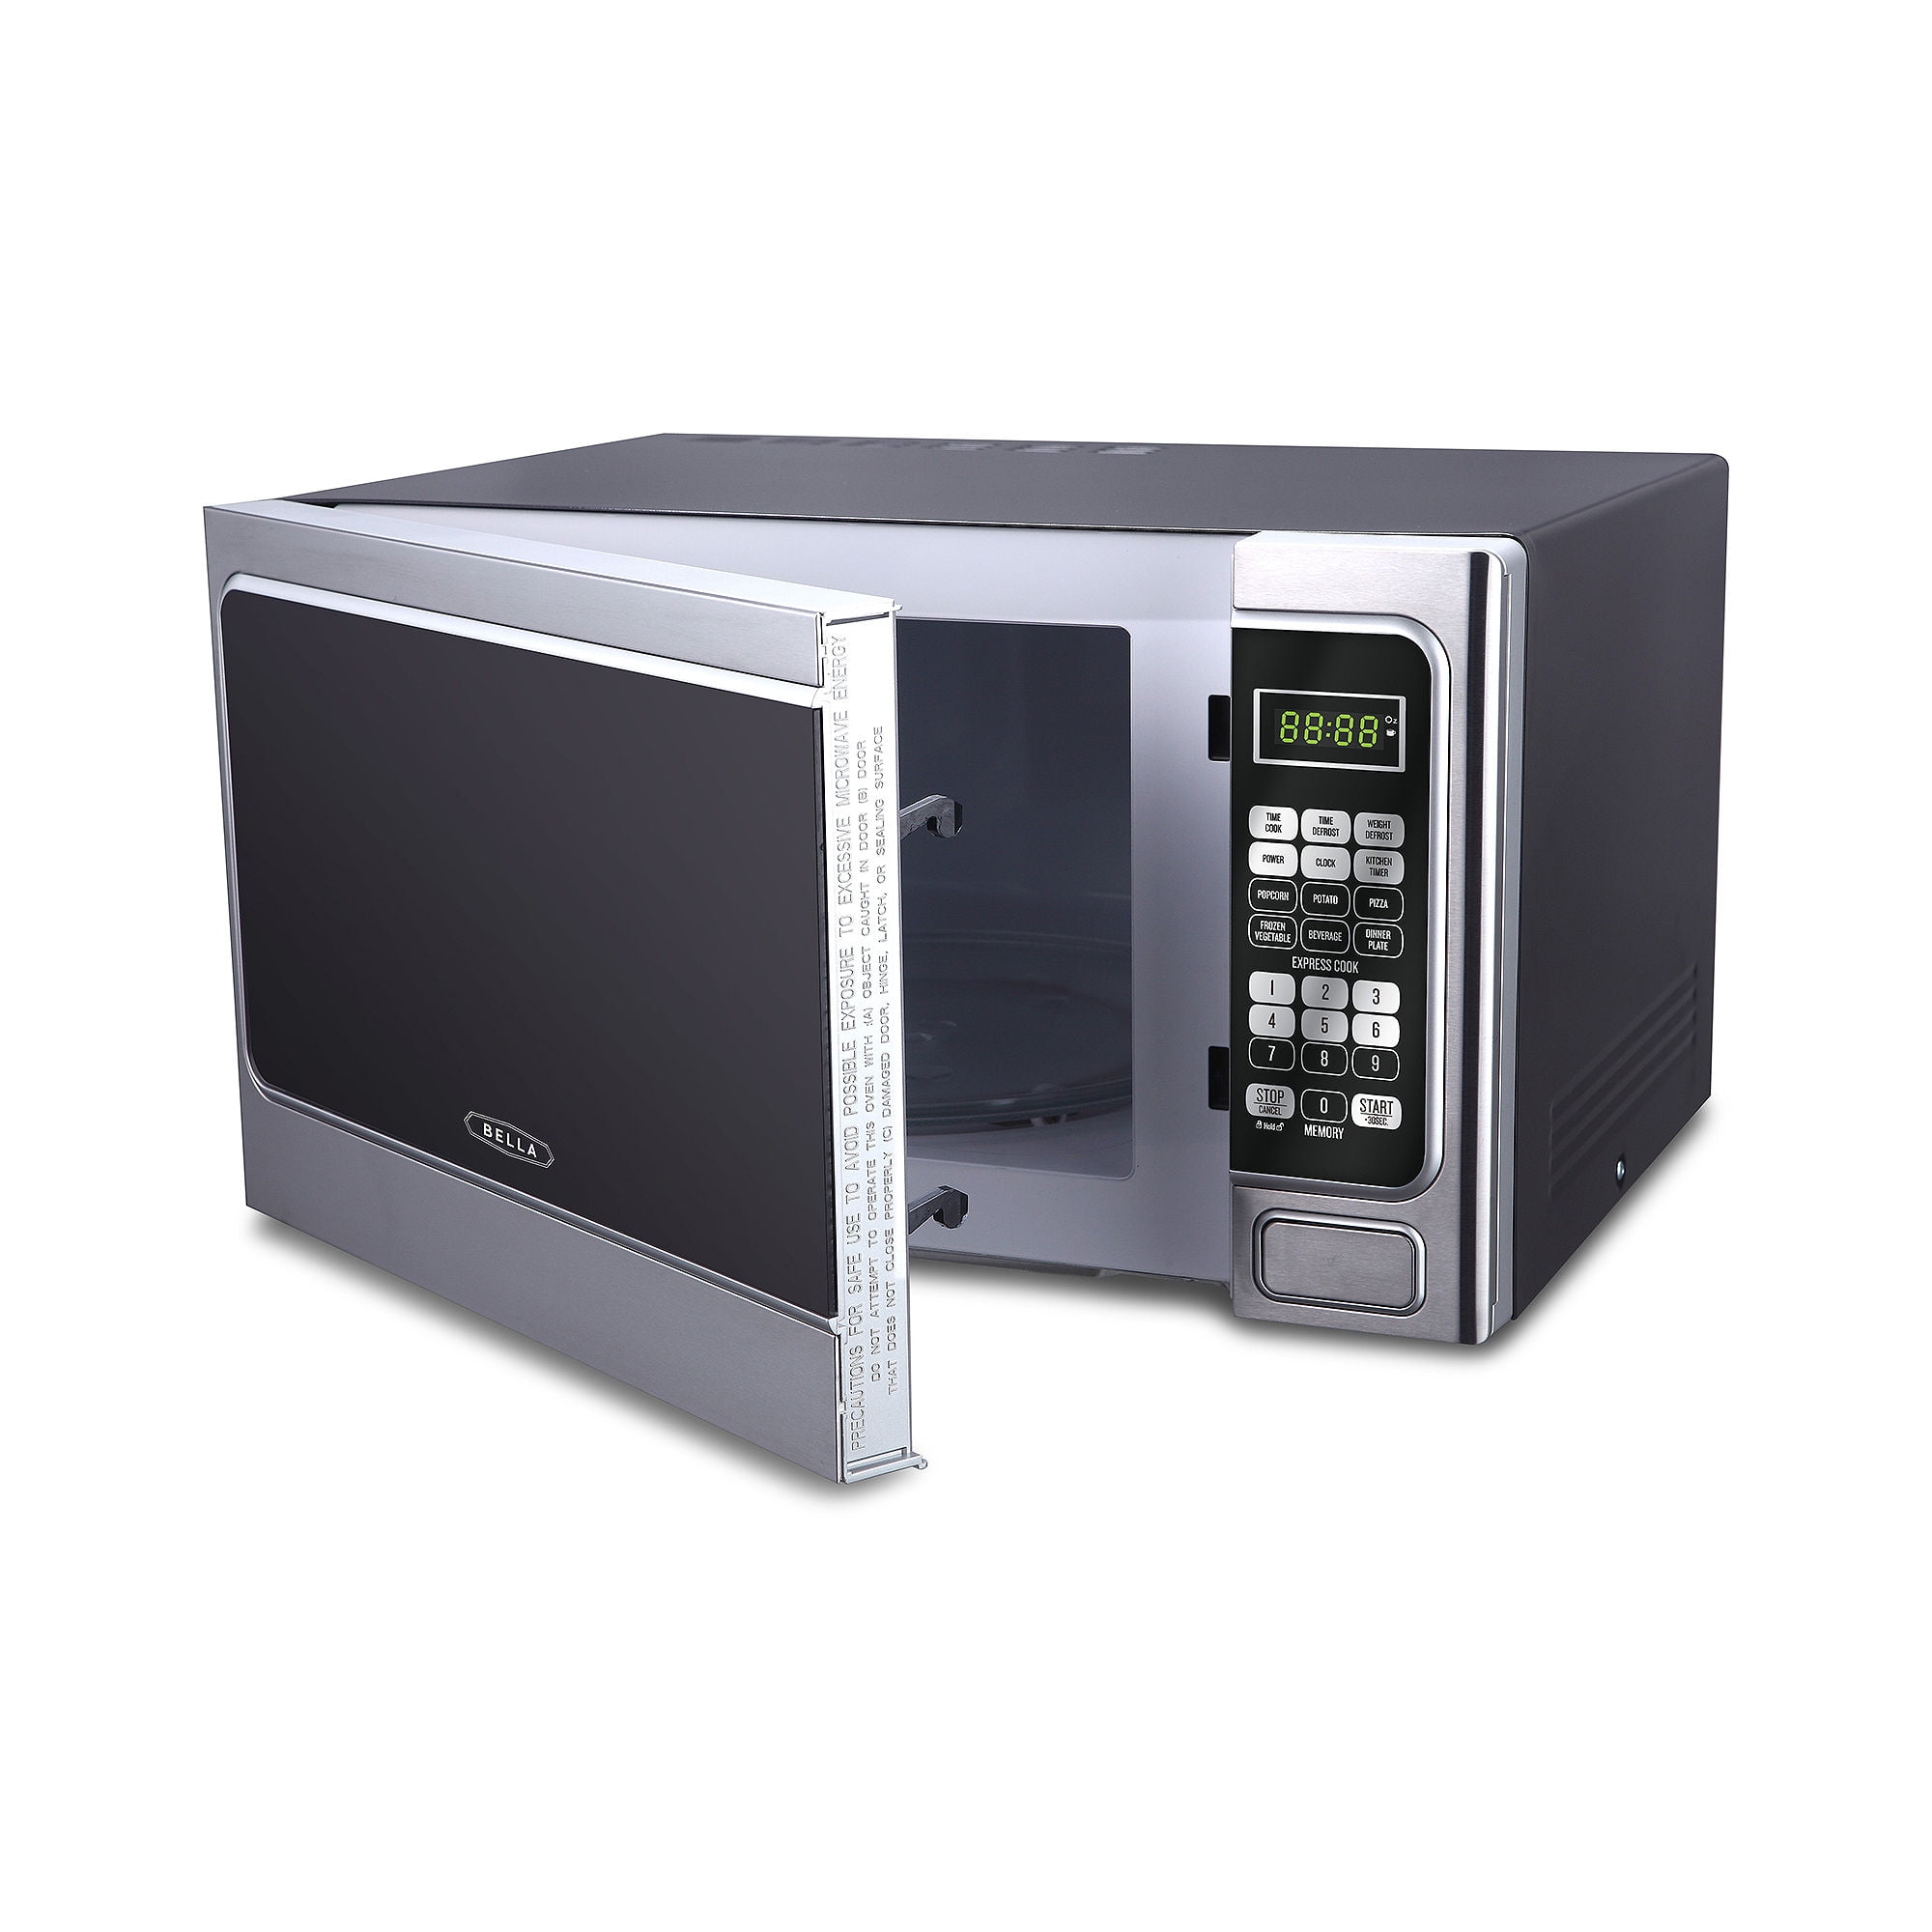 Nexel® Countertop Microwave Oven With KeyPad Control, 1000 Watts, 1.1 Cu.  Ft.